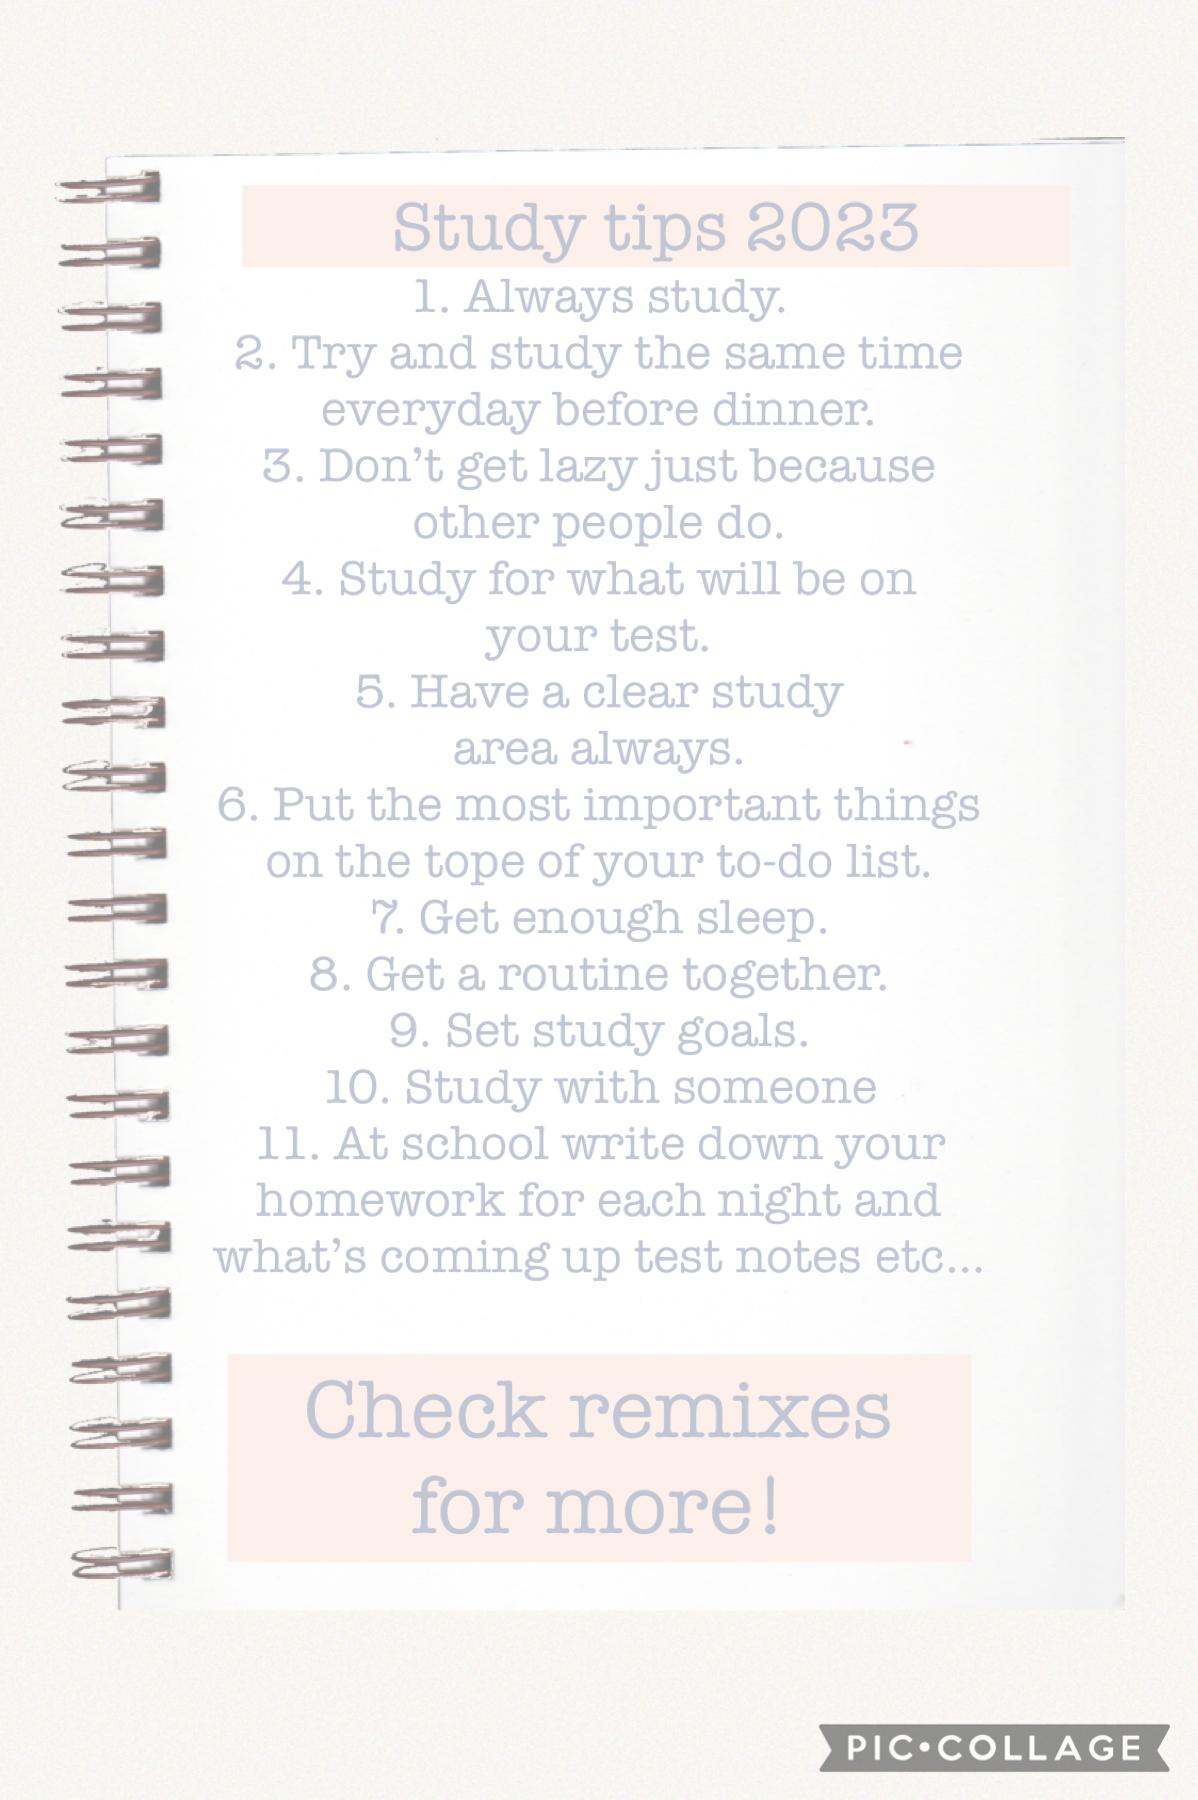 💕 Tappy 💕
Here’s some study tips from my own experience and some from the web! Hope they help! x 